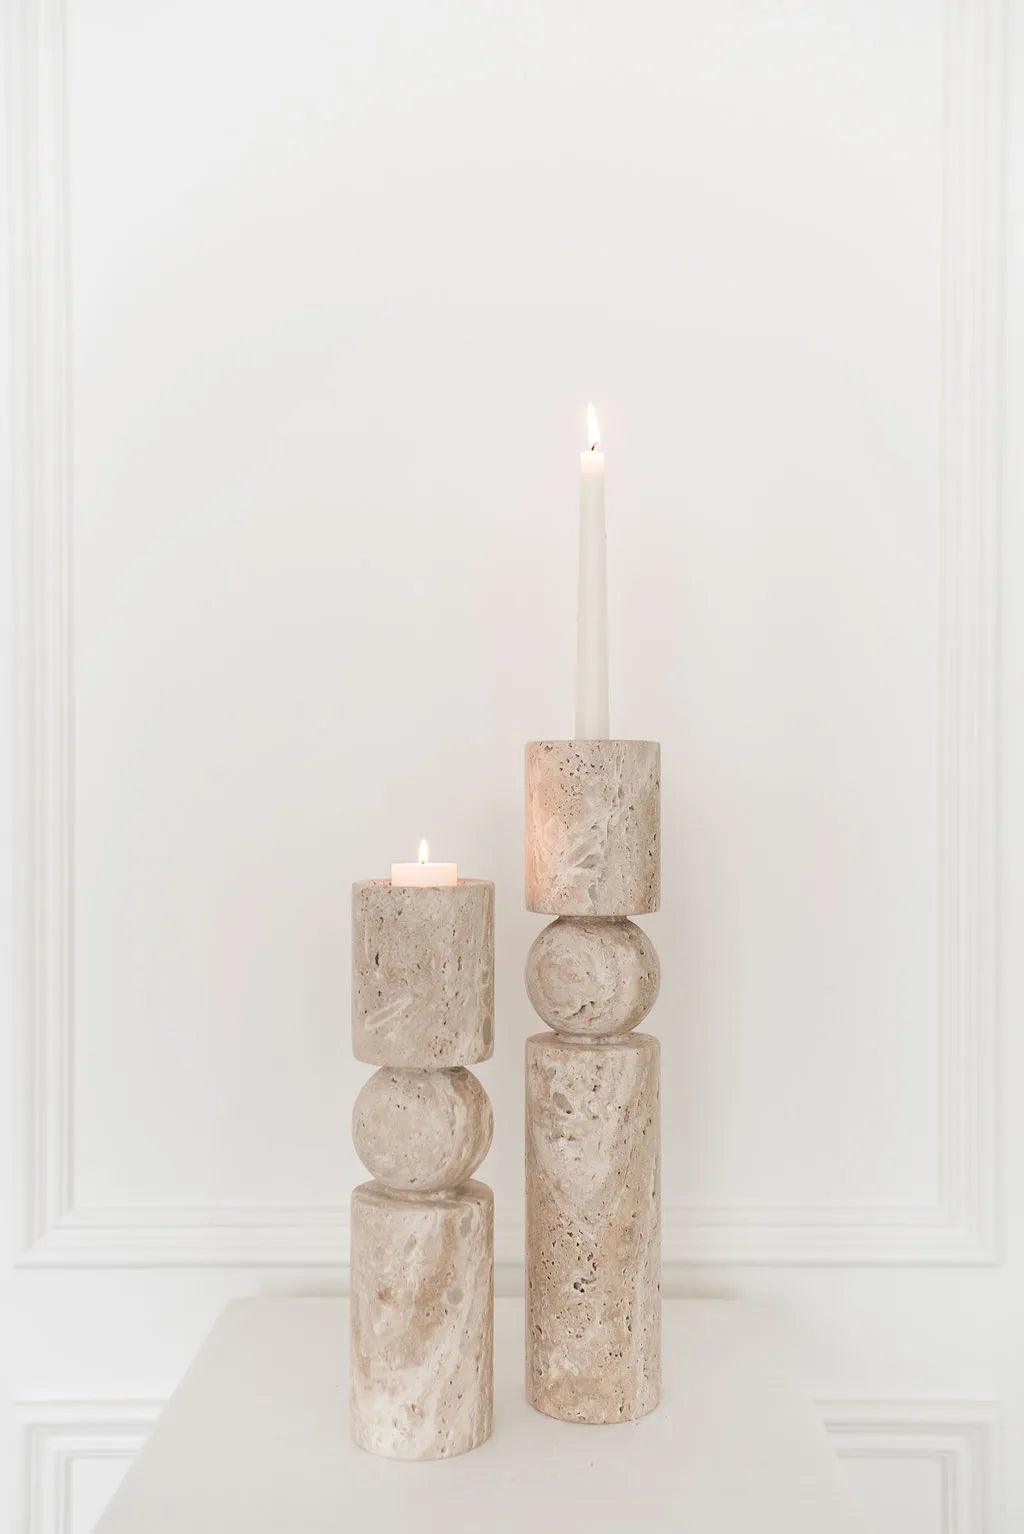 two travertine stone candle holders one with a tealight and the other with a taper candle